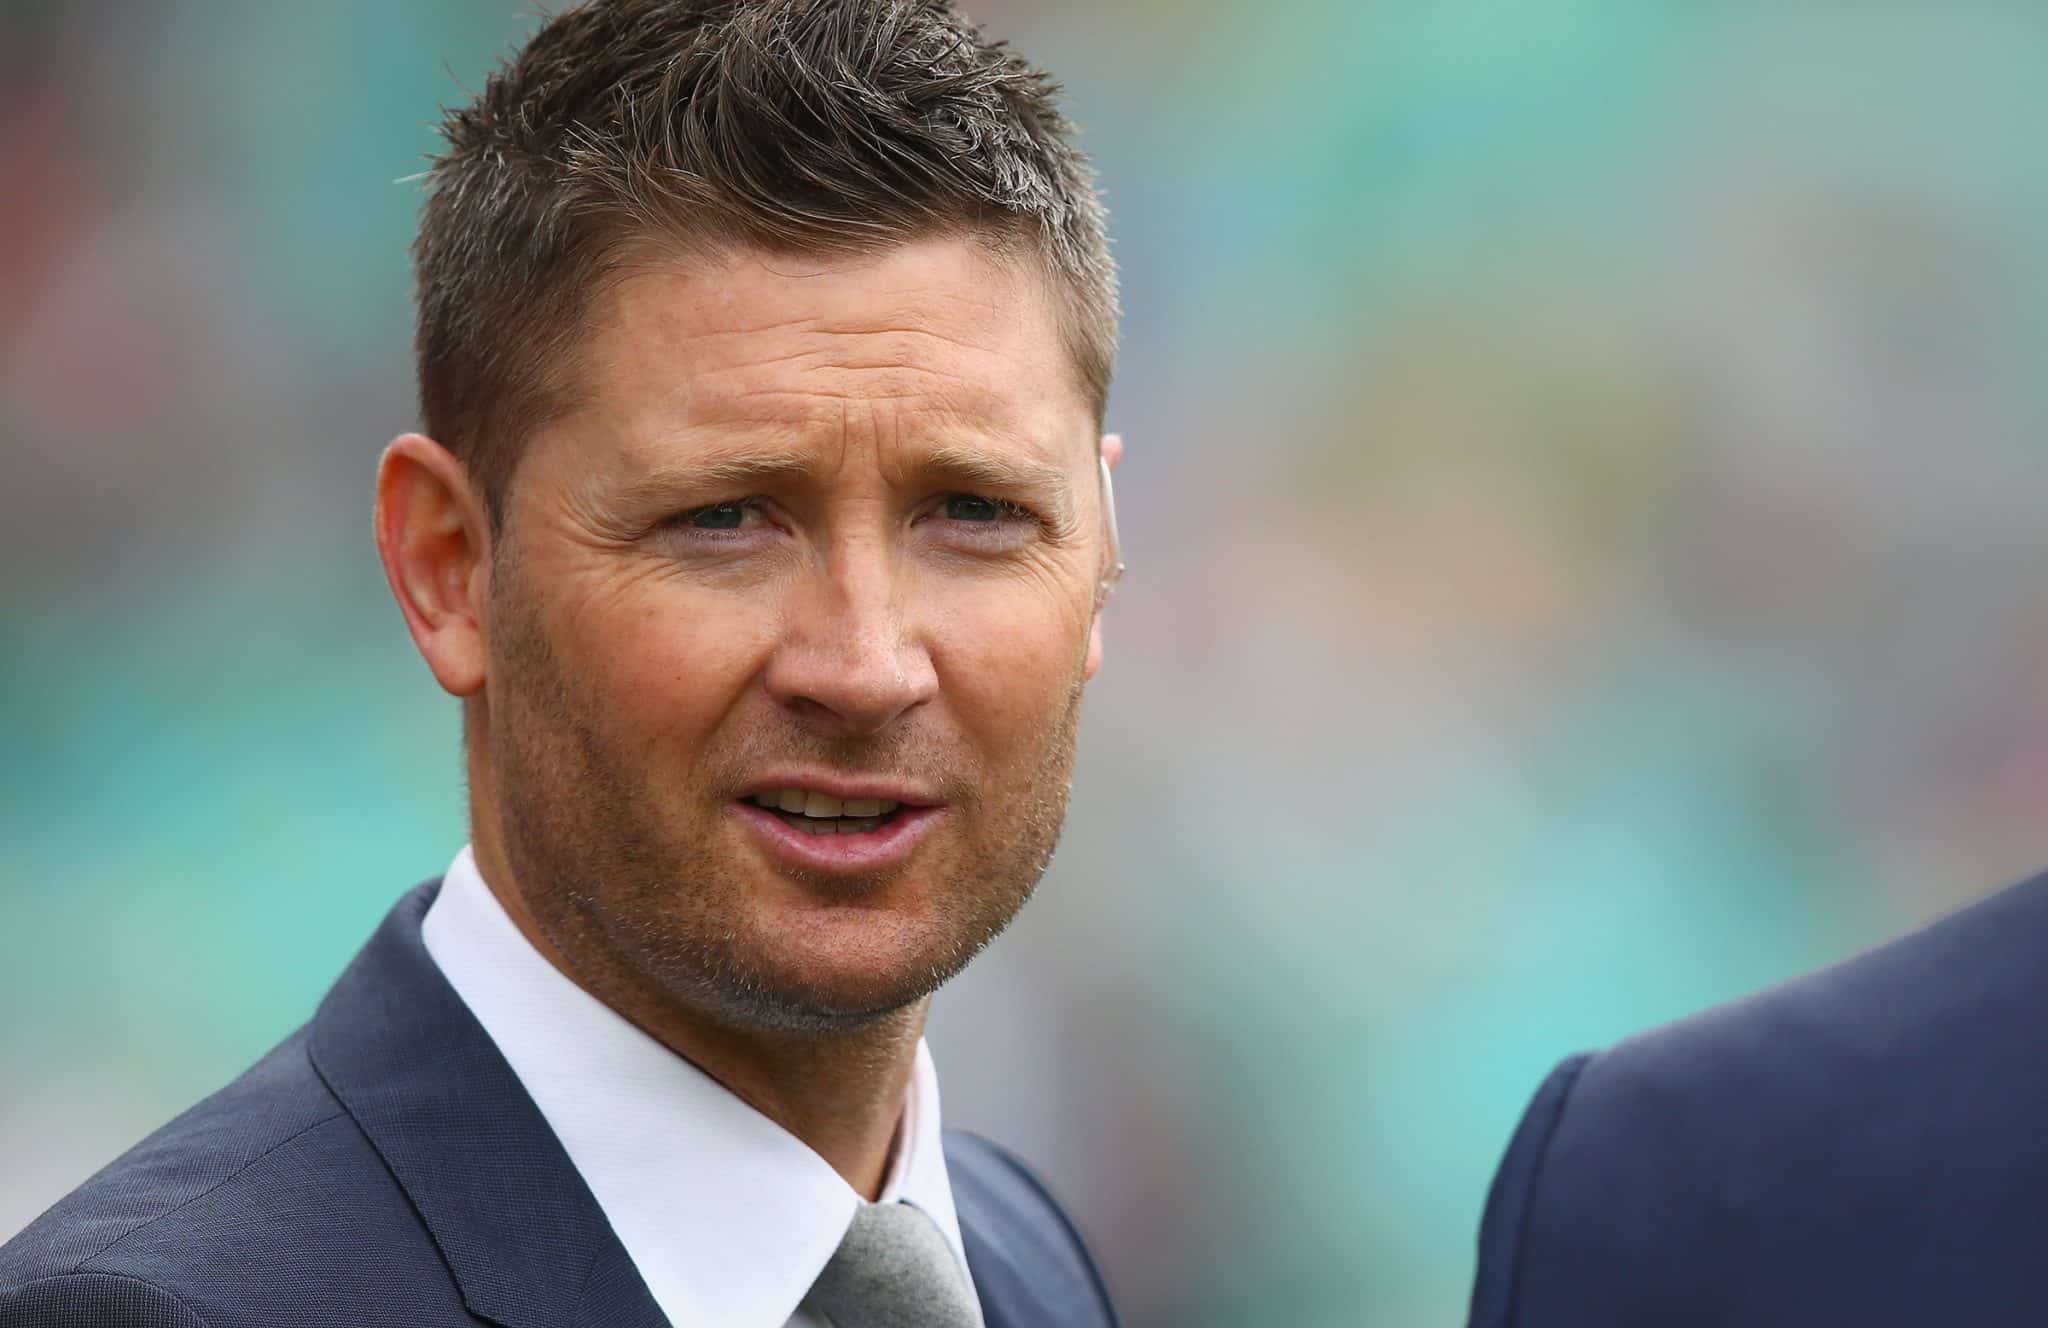 Australia will be without captain for 15 years if it is looking for perfect skipper: Clarke